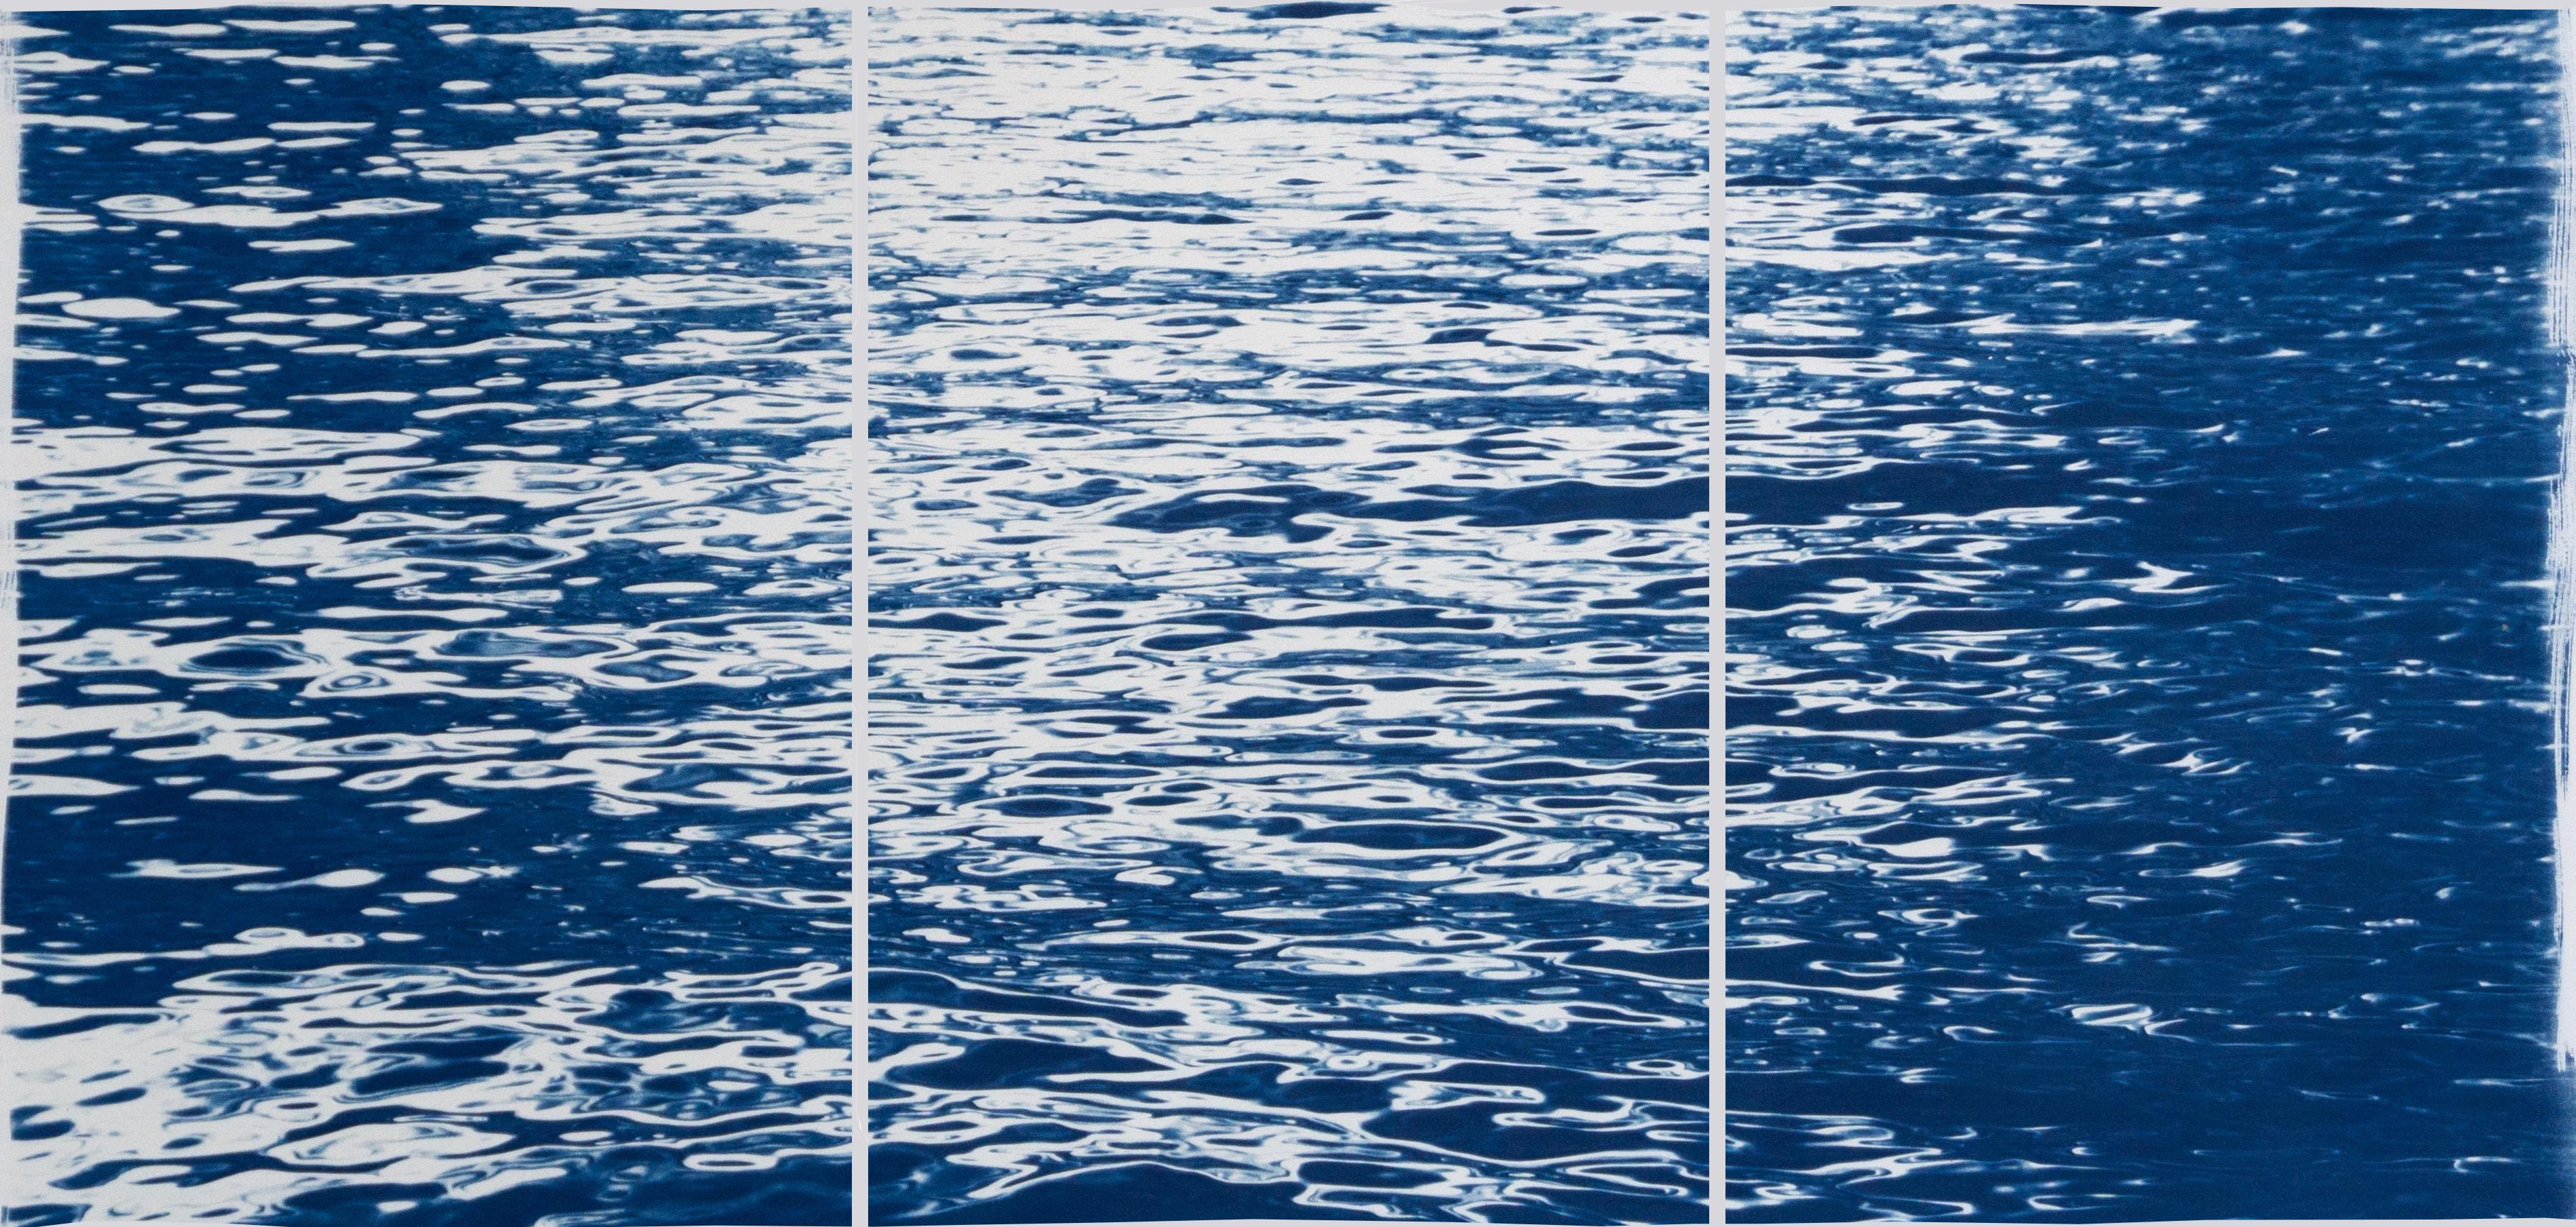 Kind of Cyan Landscape Photograph - Moonlight Ripples over Lake Como, Nautical Cyanotype Triptych of Moving Water